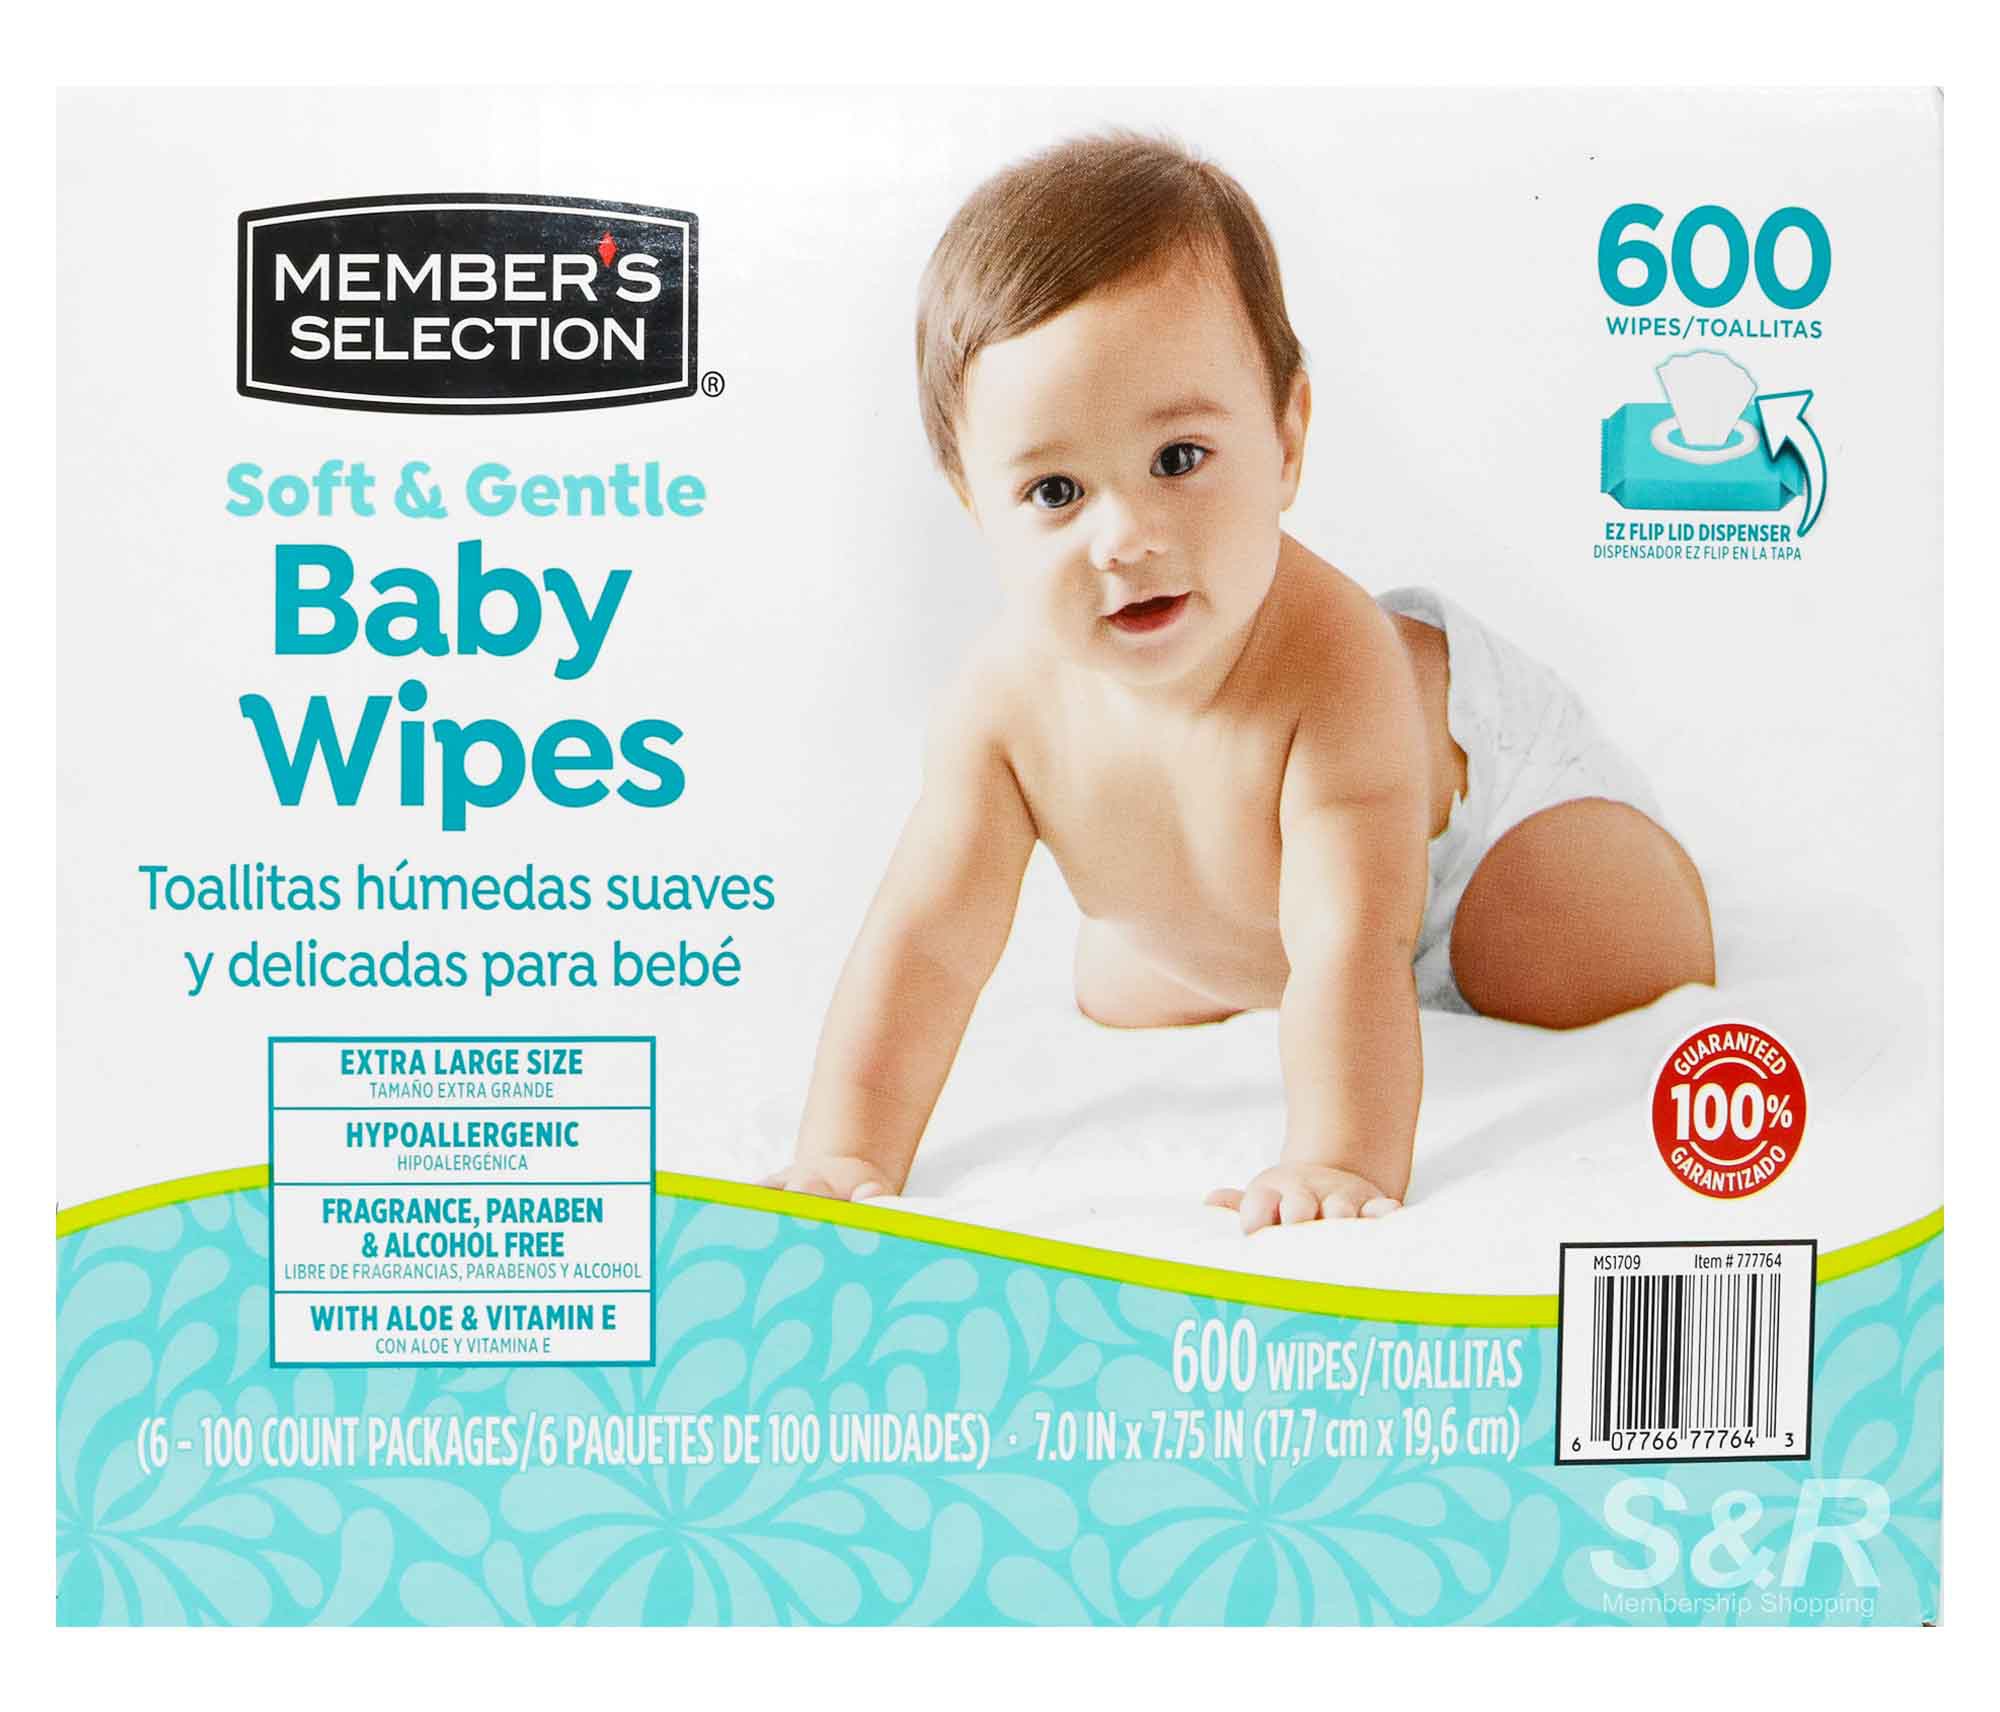 Member’s Selection soft and gentle Baby Wipes